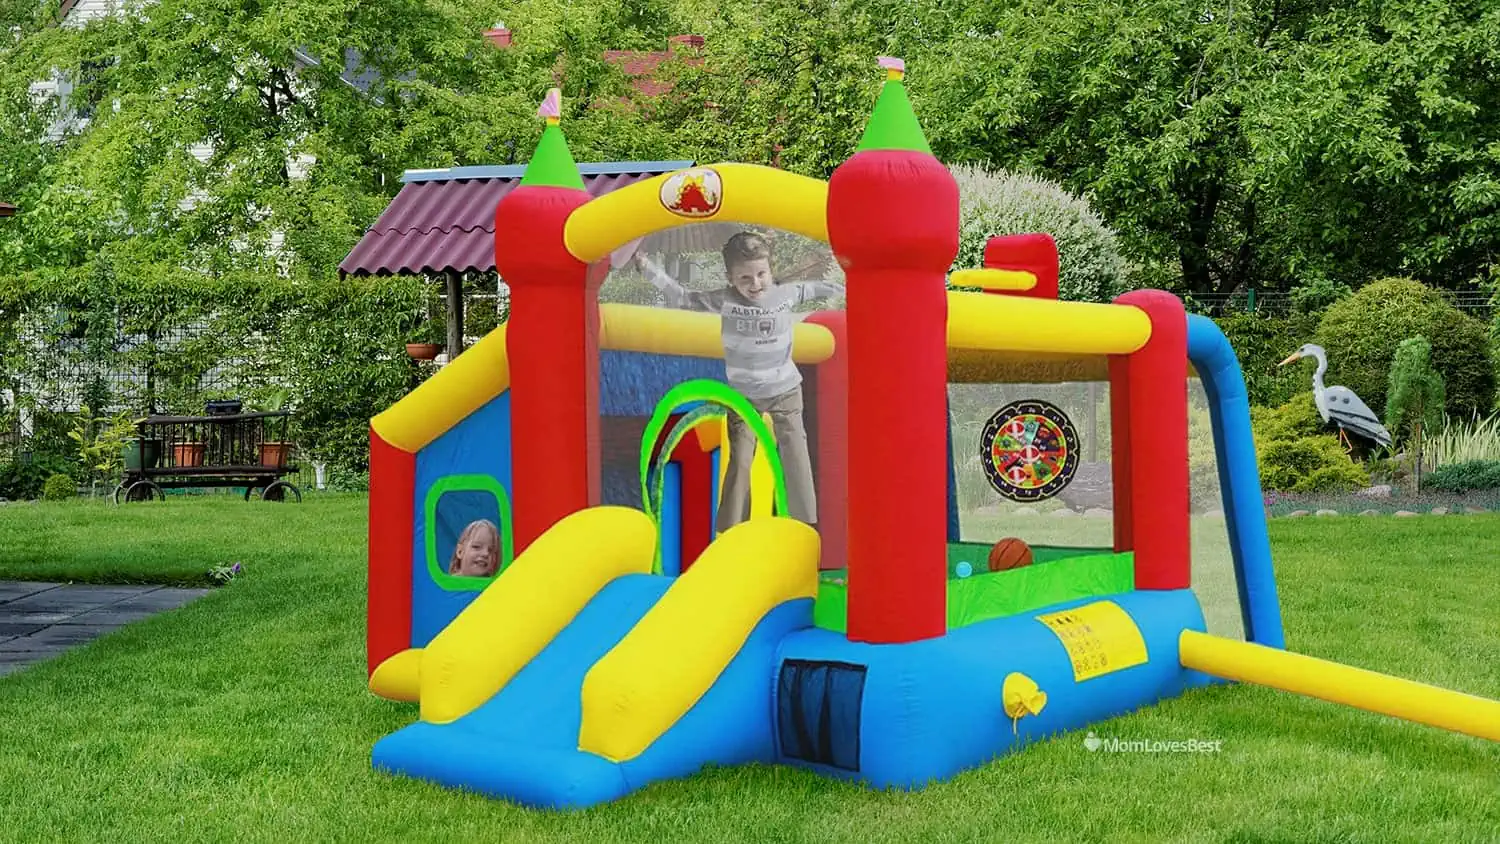 Photo of the WellFunTime Inflatable Bounce House and Ball Pit